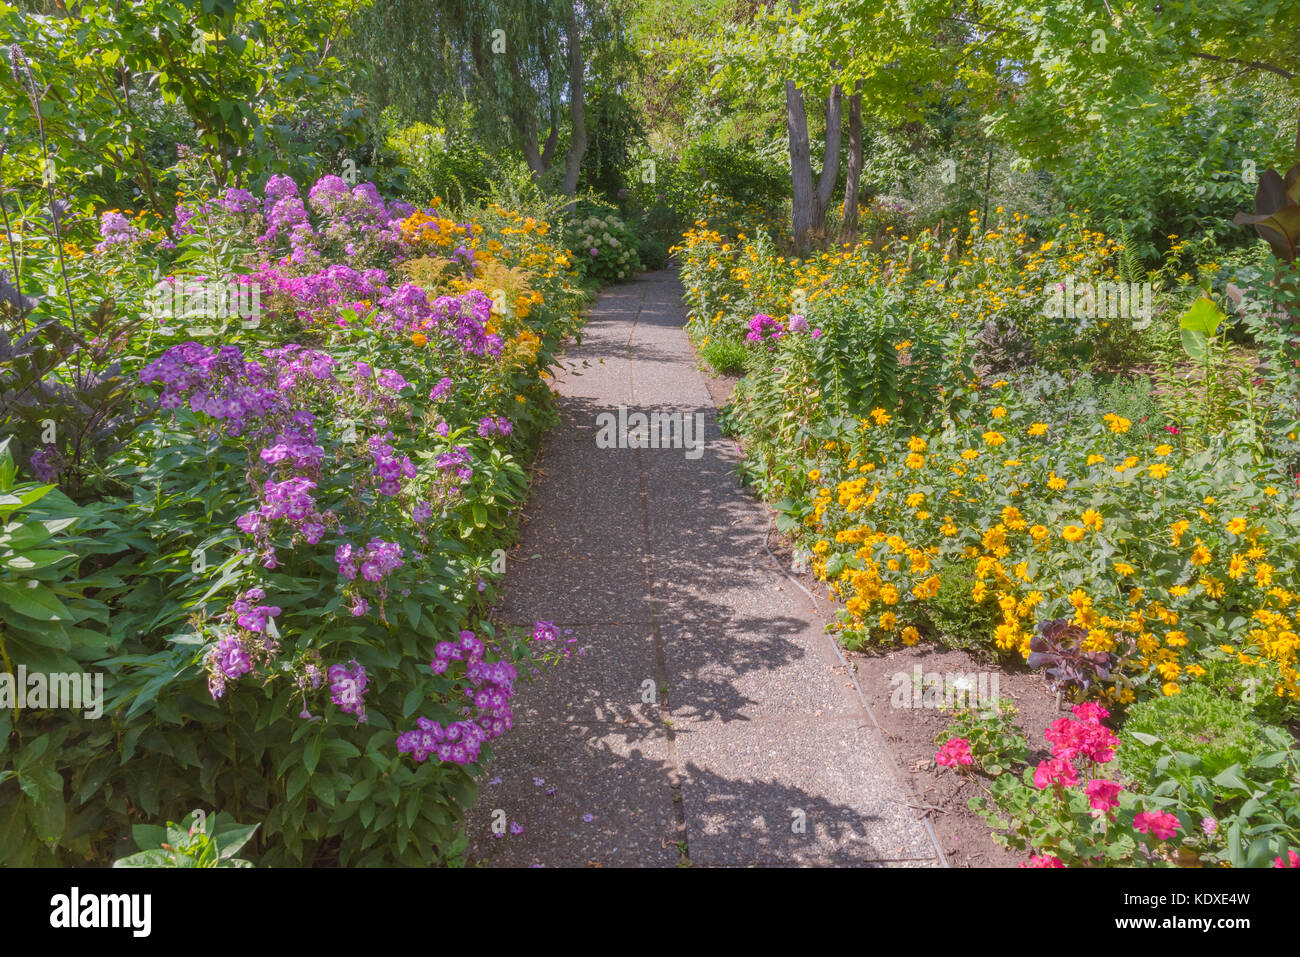 Garden path lined with bright pink and yellow flowers Stock Photo